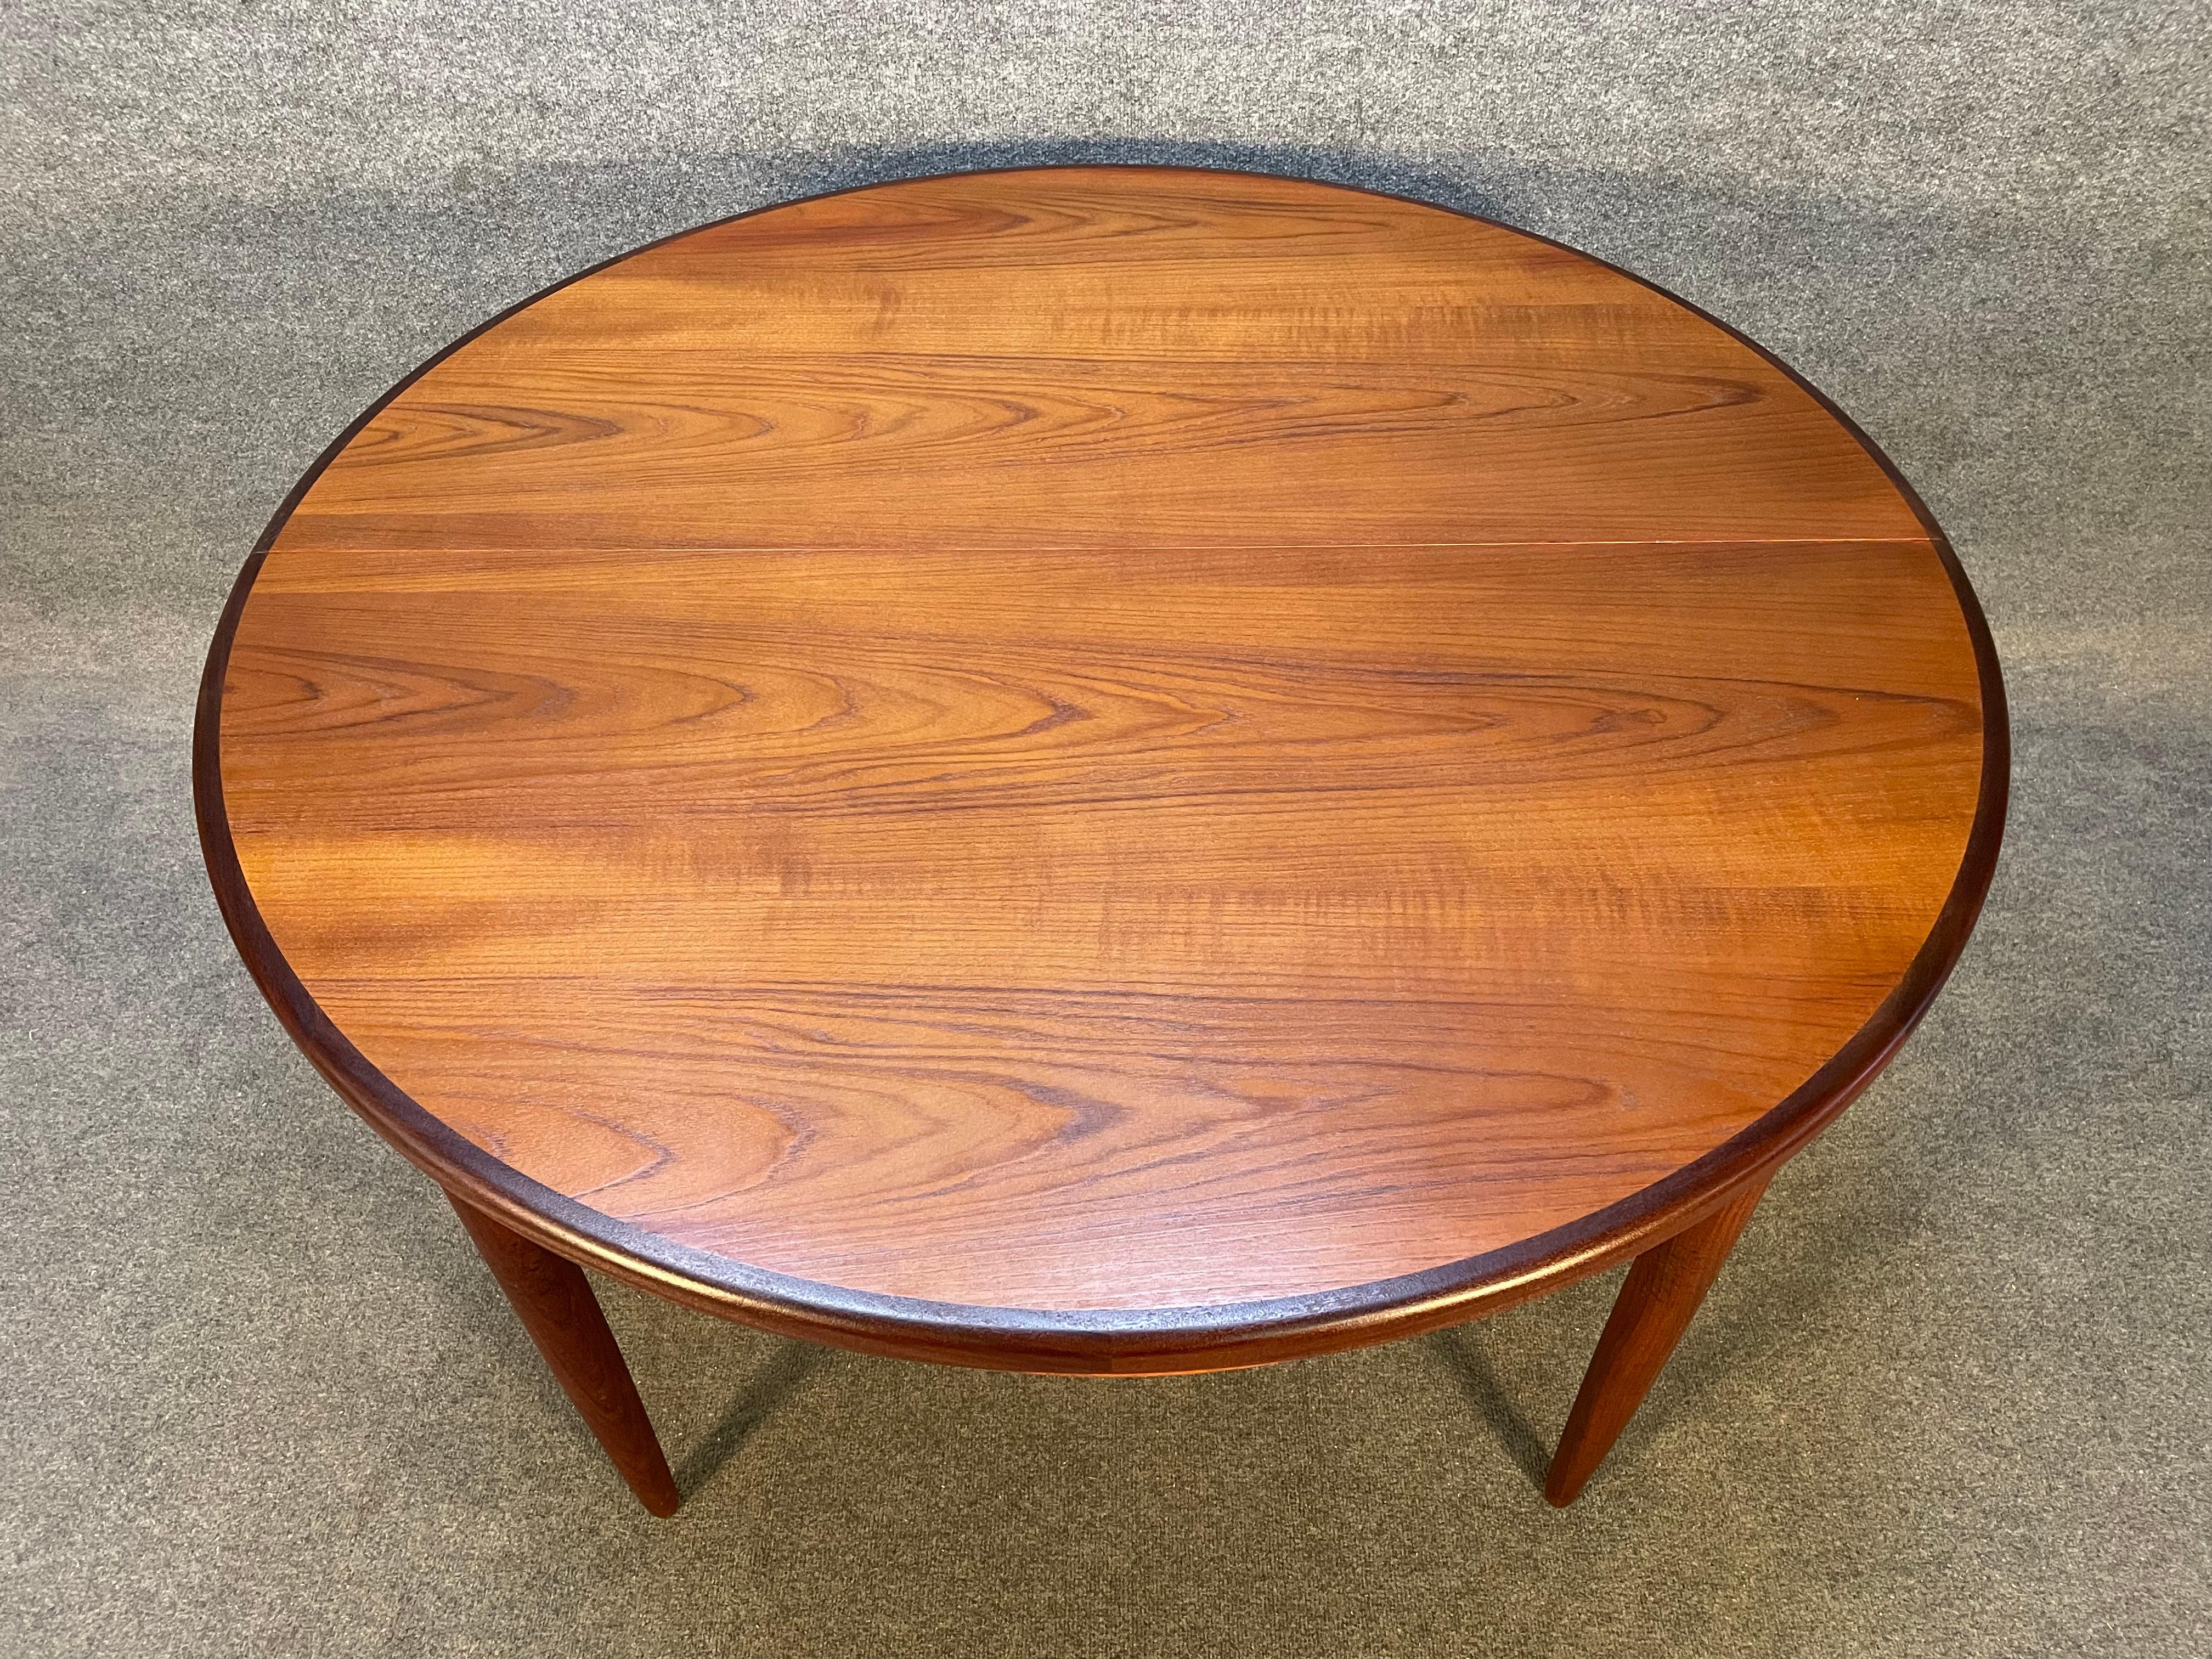 Here is a beautiful British Mid-Century Modern round dining table in teak designed by Victor Wilkins for the 